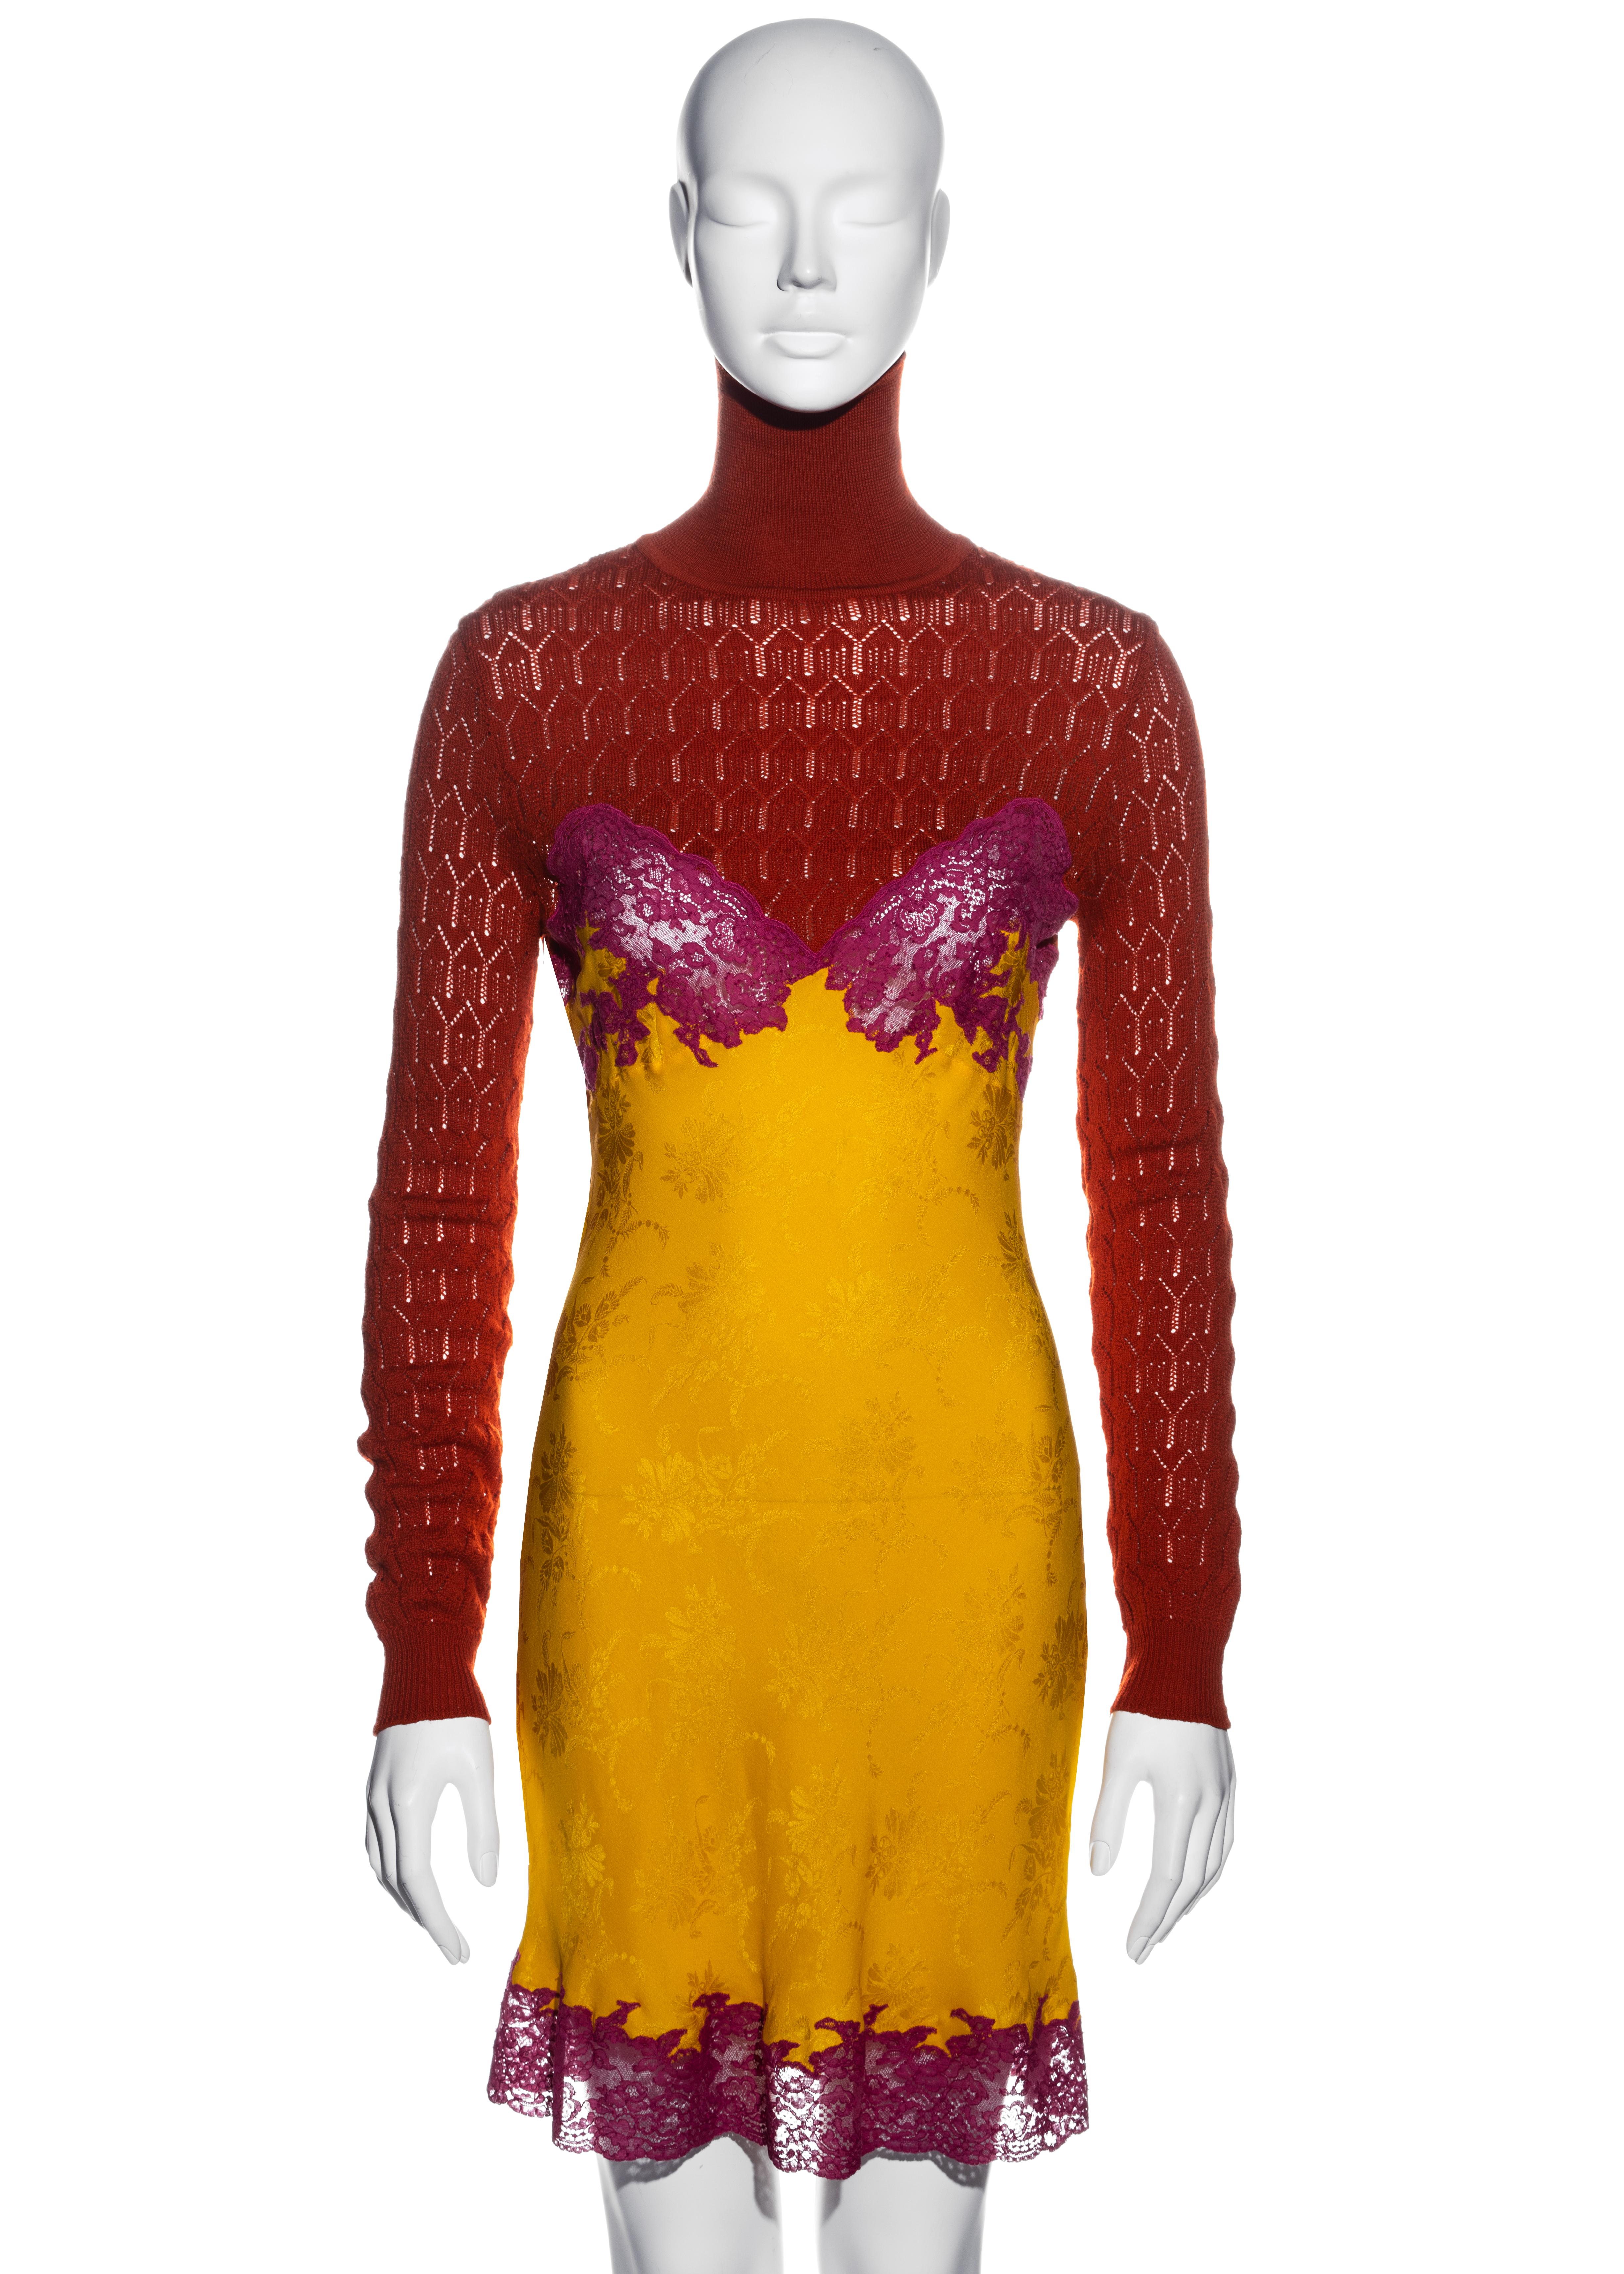 ▪ Christian Dior multicoloured silk and lace dress
▪ Designed by John Galliano 
▪ 95% Silk, 5% Lycra
▪ Red knitted wool turtleneck and sleeves
▪ Hot pink lace inserts and trim 
▪ Yellow floral silk jacquard 
▪ FR 38 - UK 10 - US 6
▪ Fall-Winter 1998
